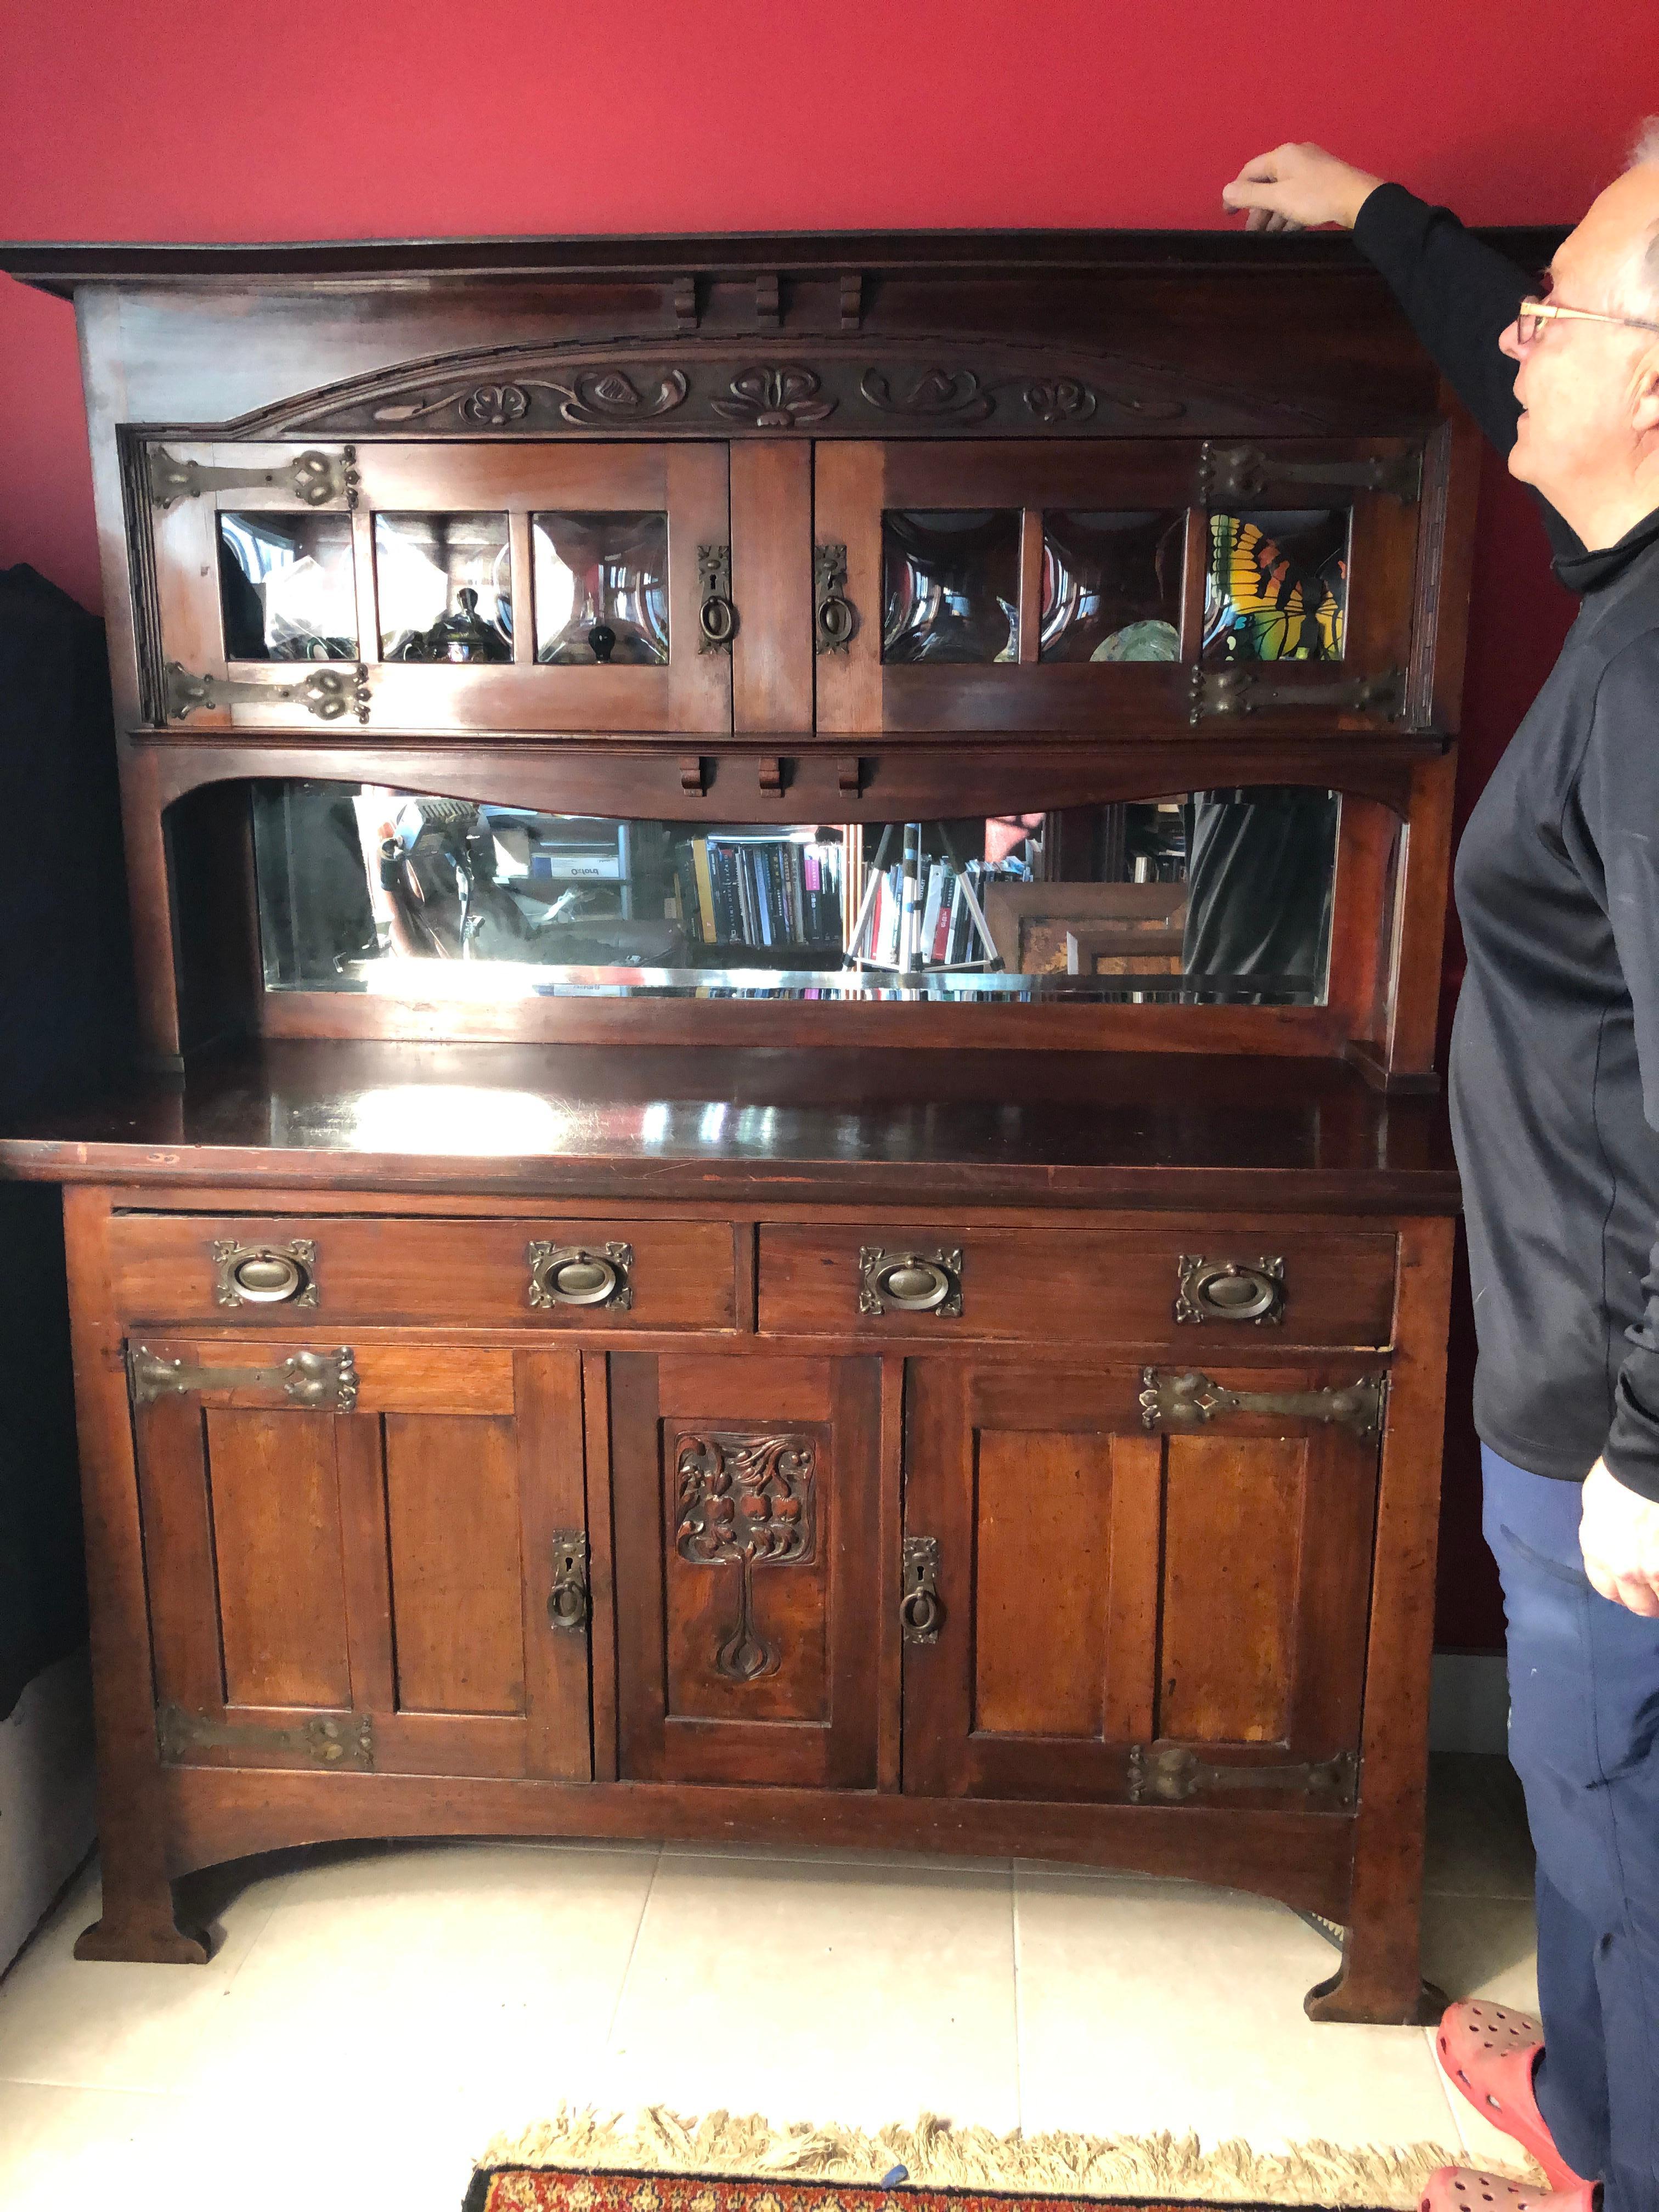 A fine English antique two part mahogany side board, buffet, or cabinet constructed in two parts, top and bottom. Features original Arts & Crafts tulip strap hinges and pulls hardware with 2 over 2 doors in the bottom section and 2 doors in top